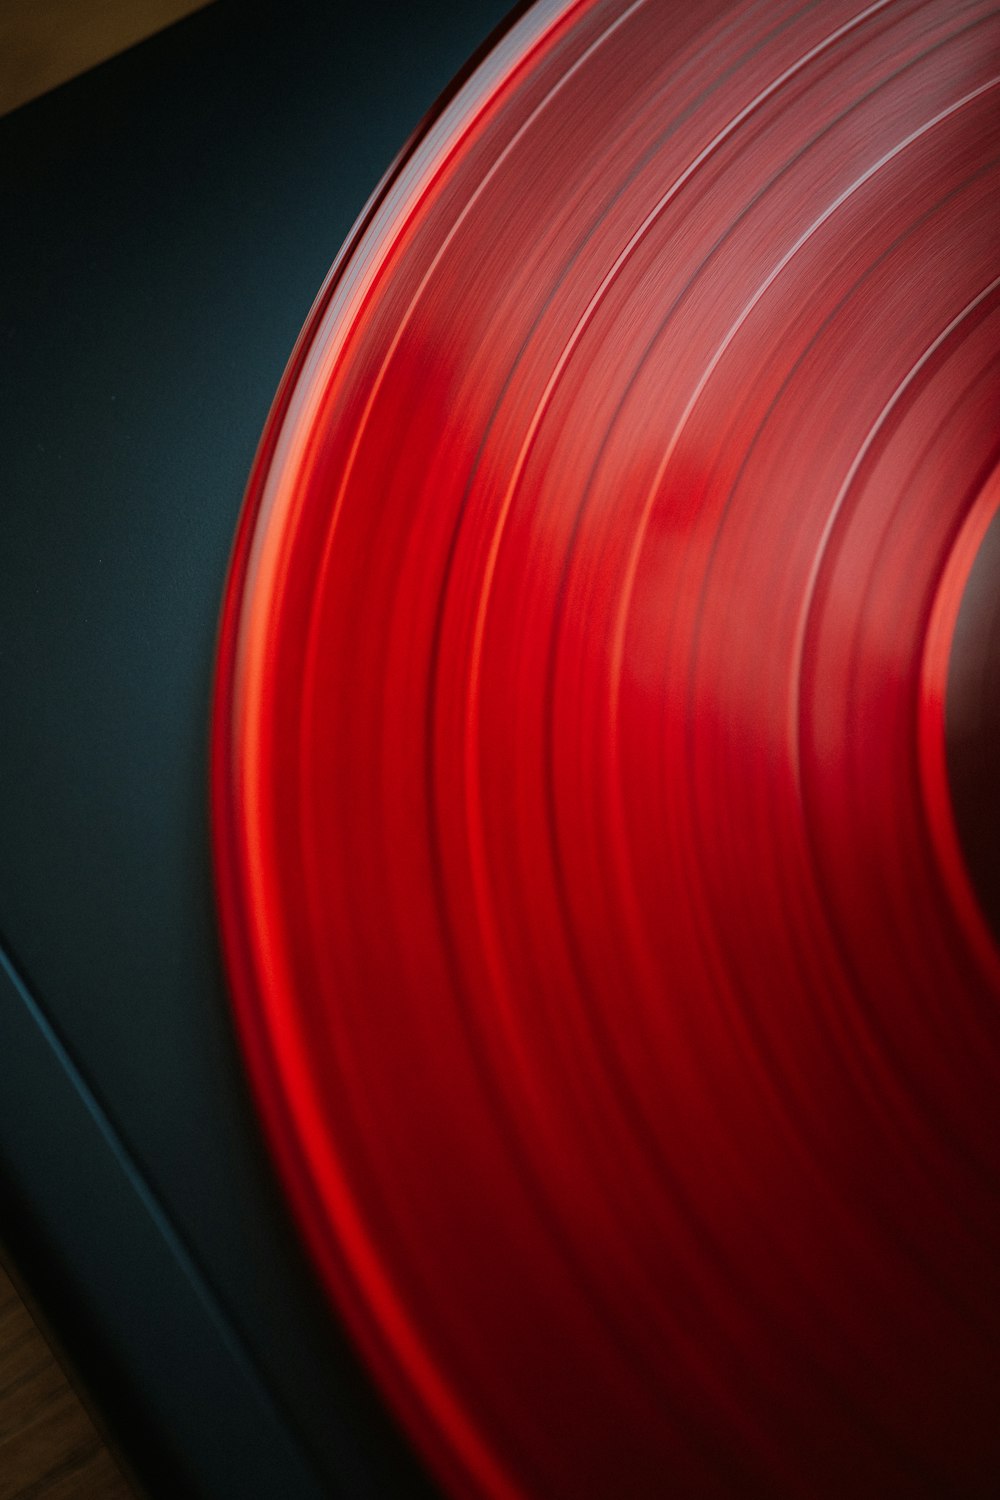 a close up of a red record on a black surface